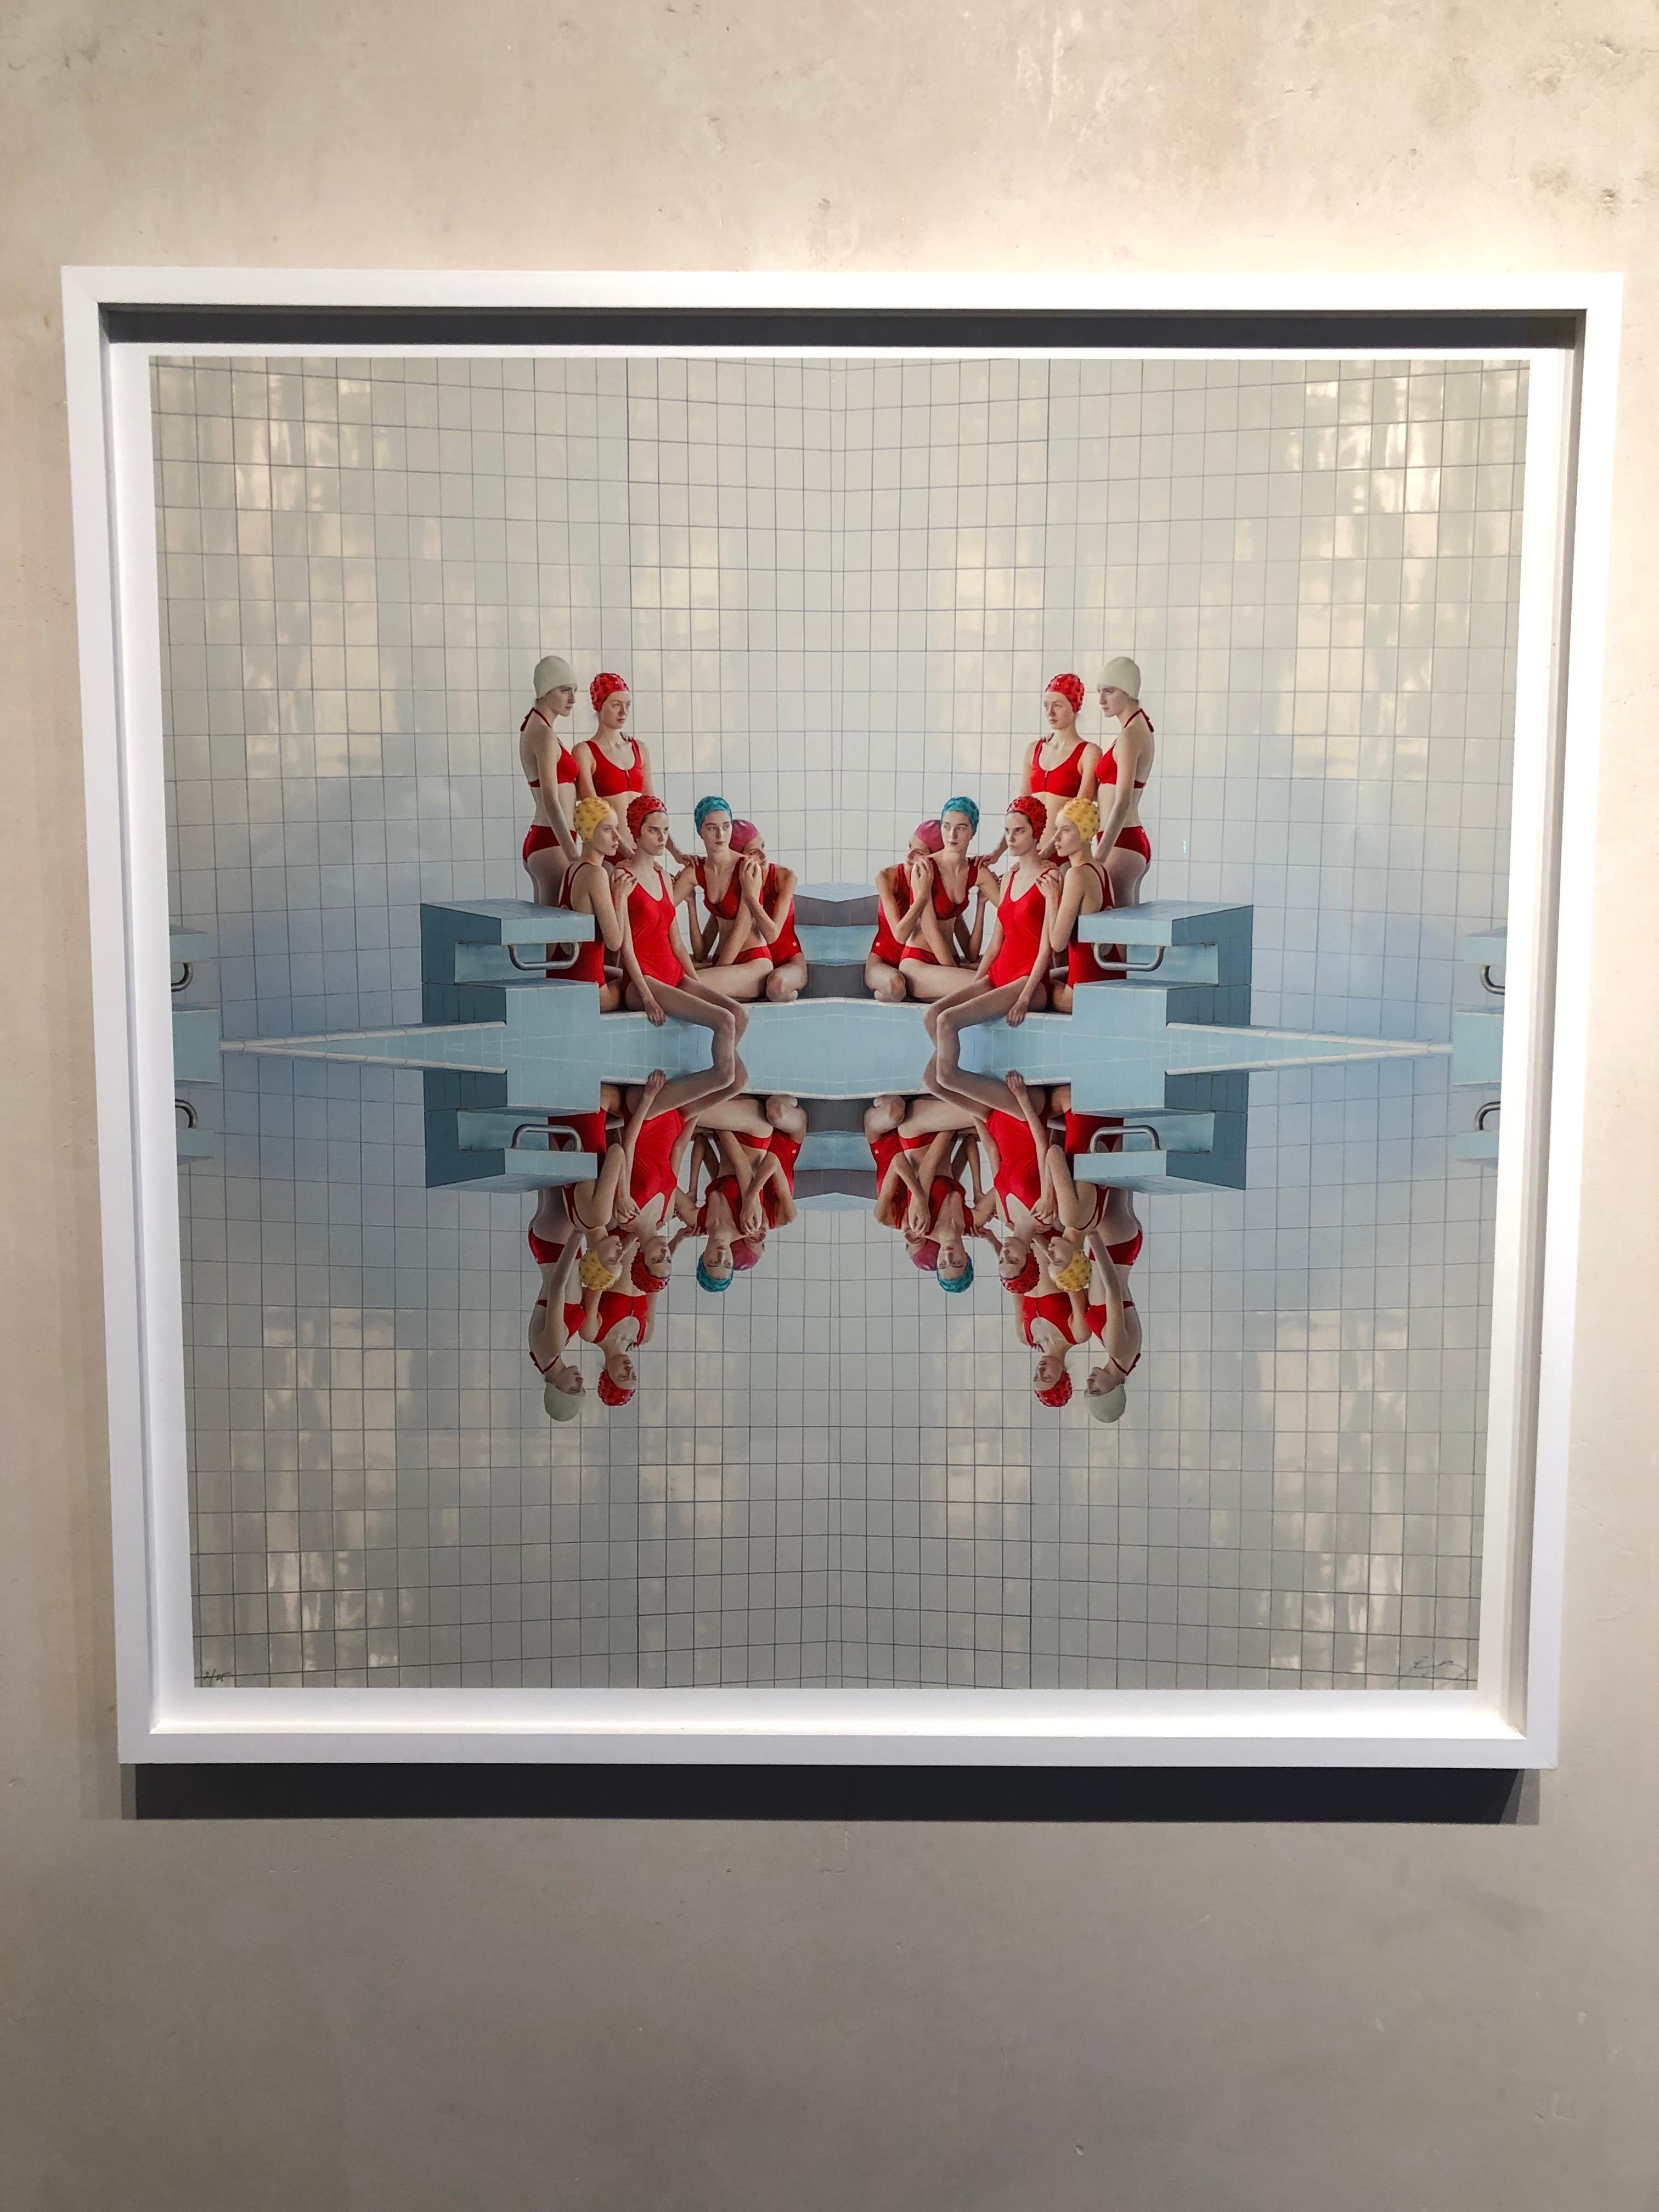 Symmetry- framed 30 x 30 geometric figurative photograph in reds and blues  - Photograph by Maria Svarbova